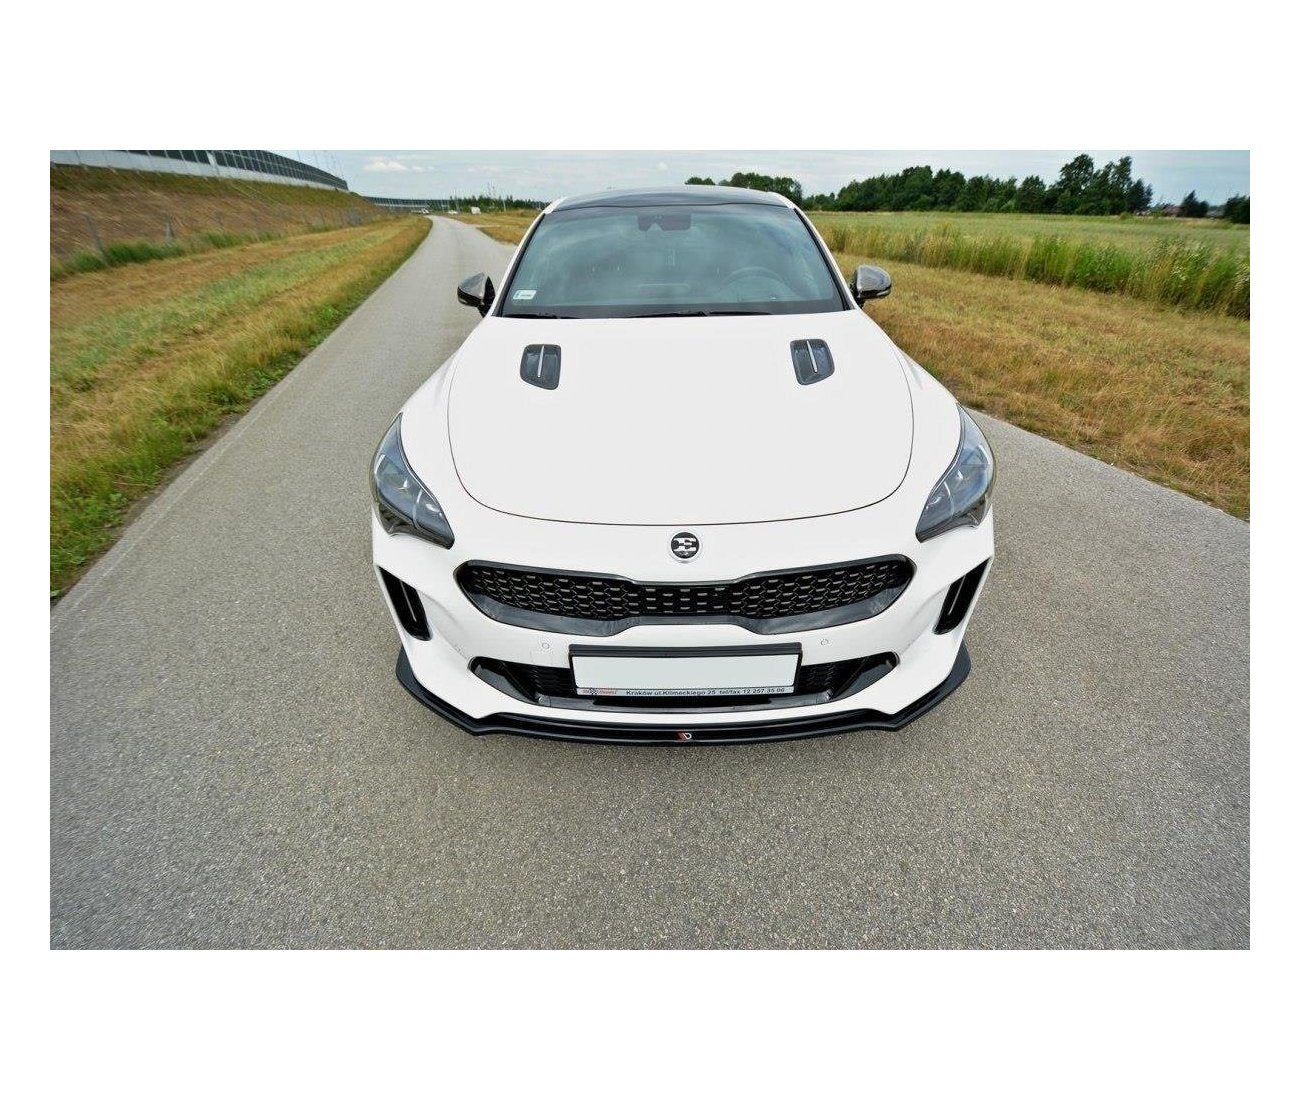 Cup spoiler lip front approach V.2 for Kia Stinger GT